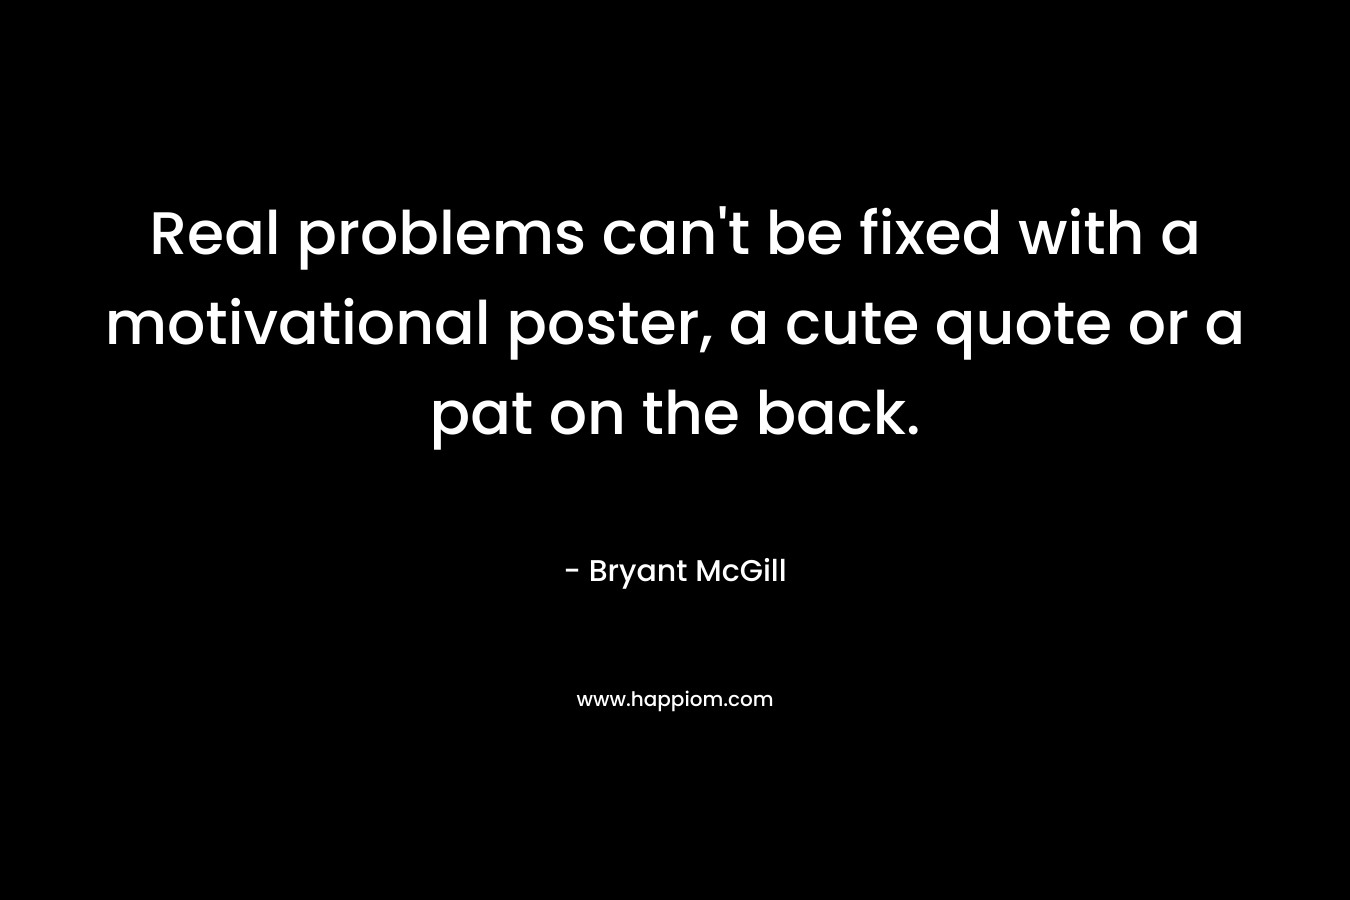 Real problems can’t be fixed with a motivational poster, a cute quote or a pat on the back. – Bryant McGill